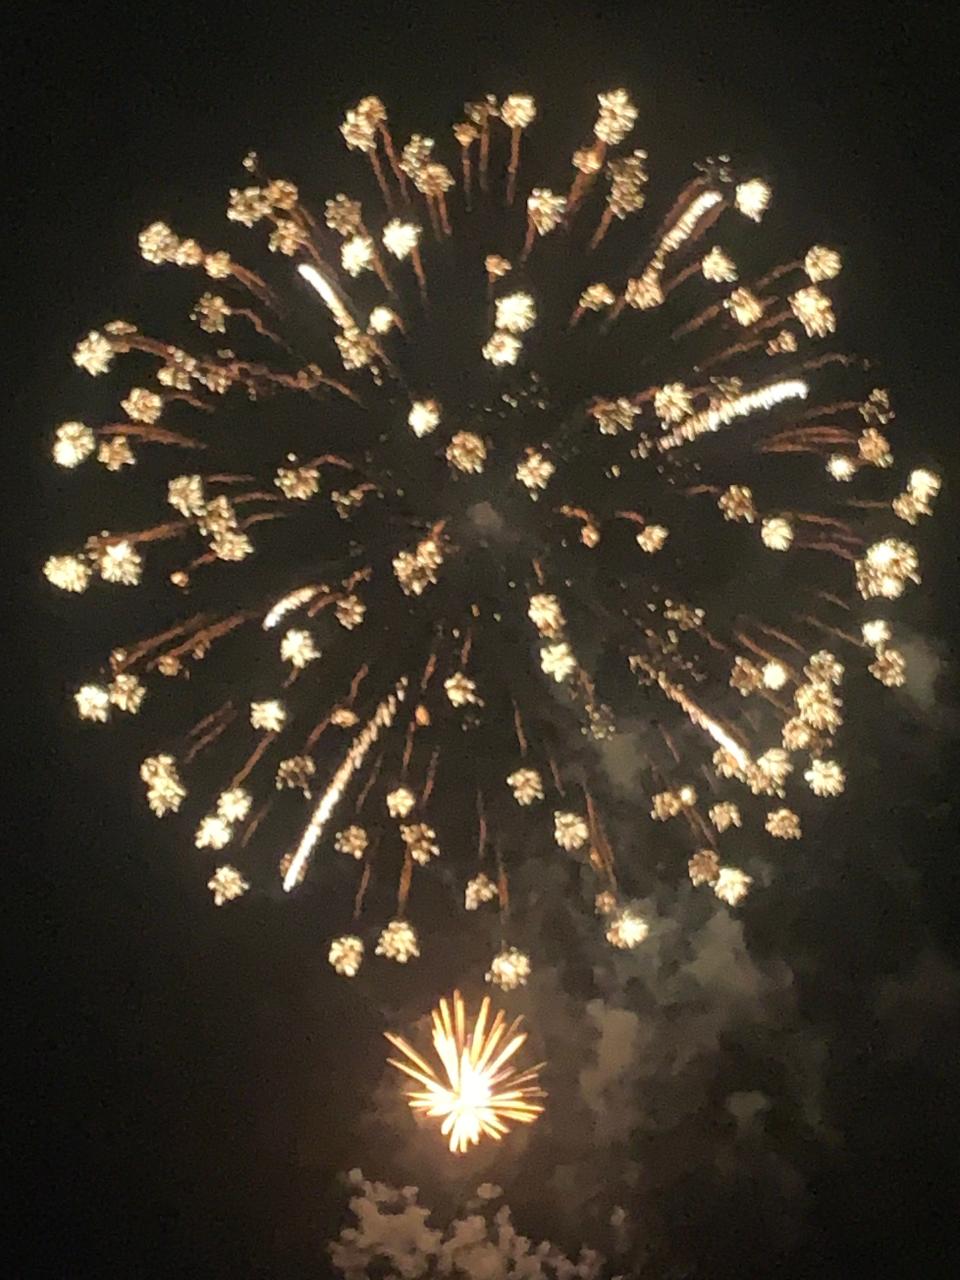 Fireworks over the East Bench in Red Lodge, Montana at the end of the Fourth of July holiday. Columnist Carrie Seidman is on a writer's retreat in Red Lodge.